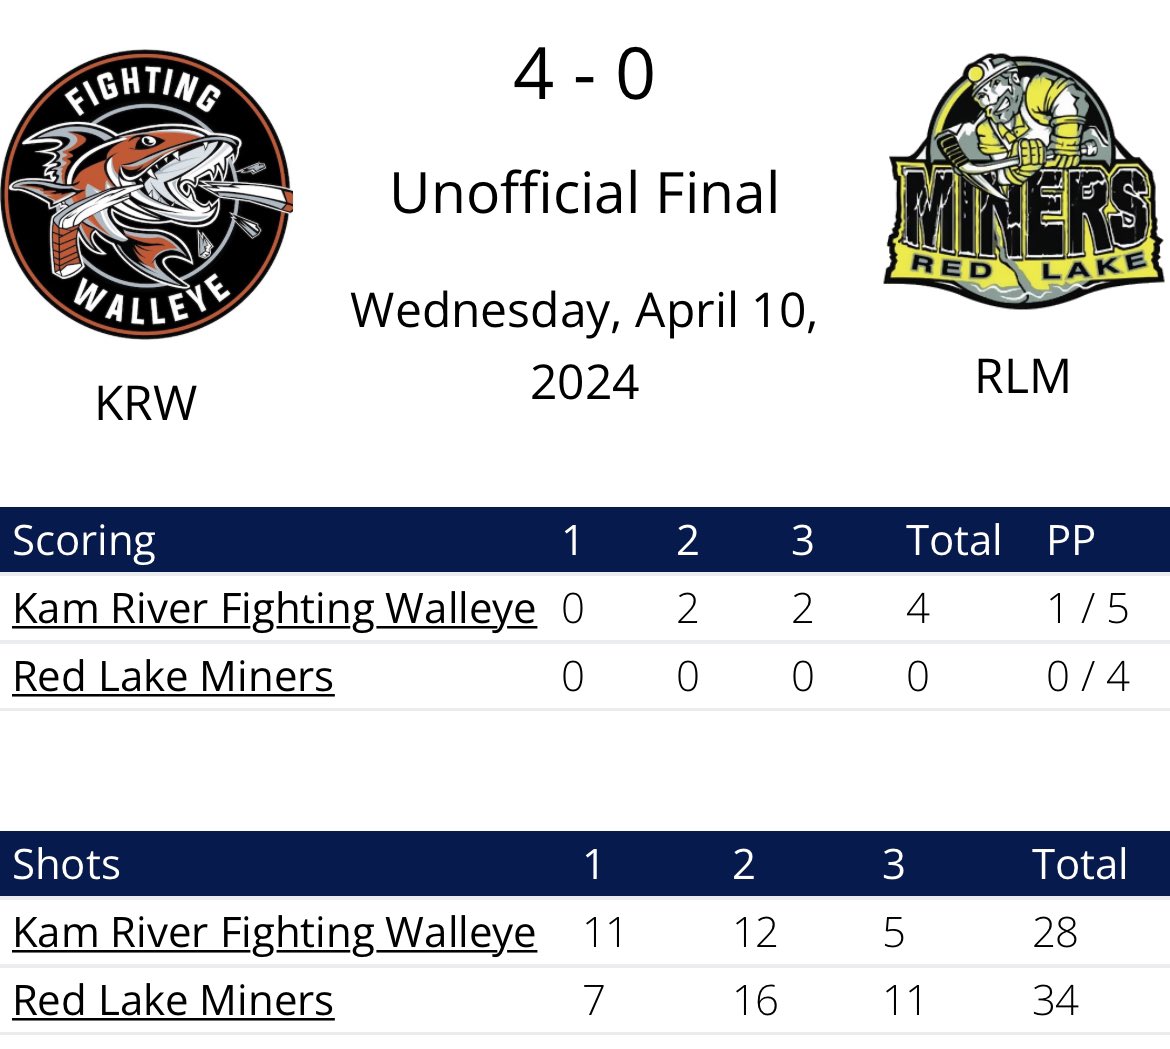 POST GAME | Do or die tomorrow night for the fellas as we are down 3-0 in the SIJHL Semi Finals. 🛑 Davis - 24/28 #MinerFamily | #TheHardWay ⚫️⛏️🟡